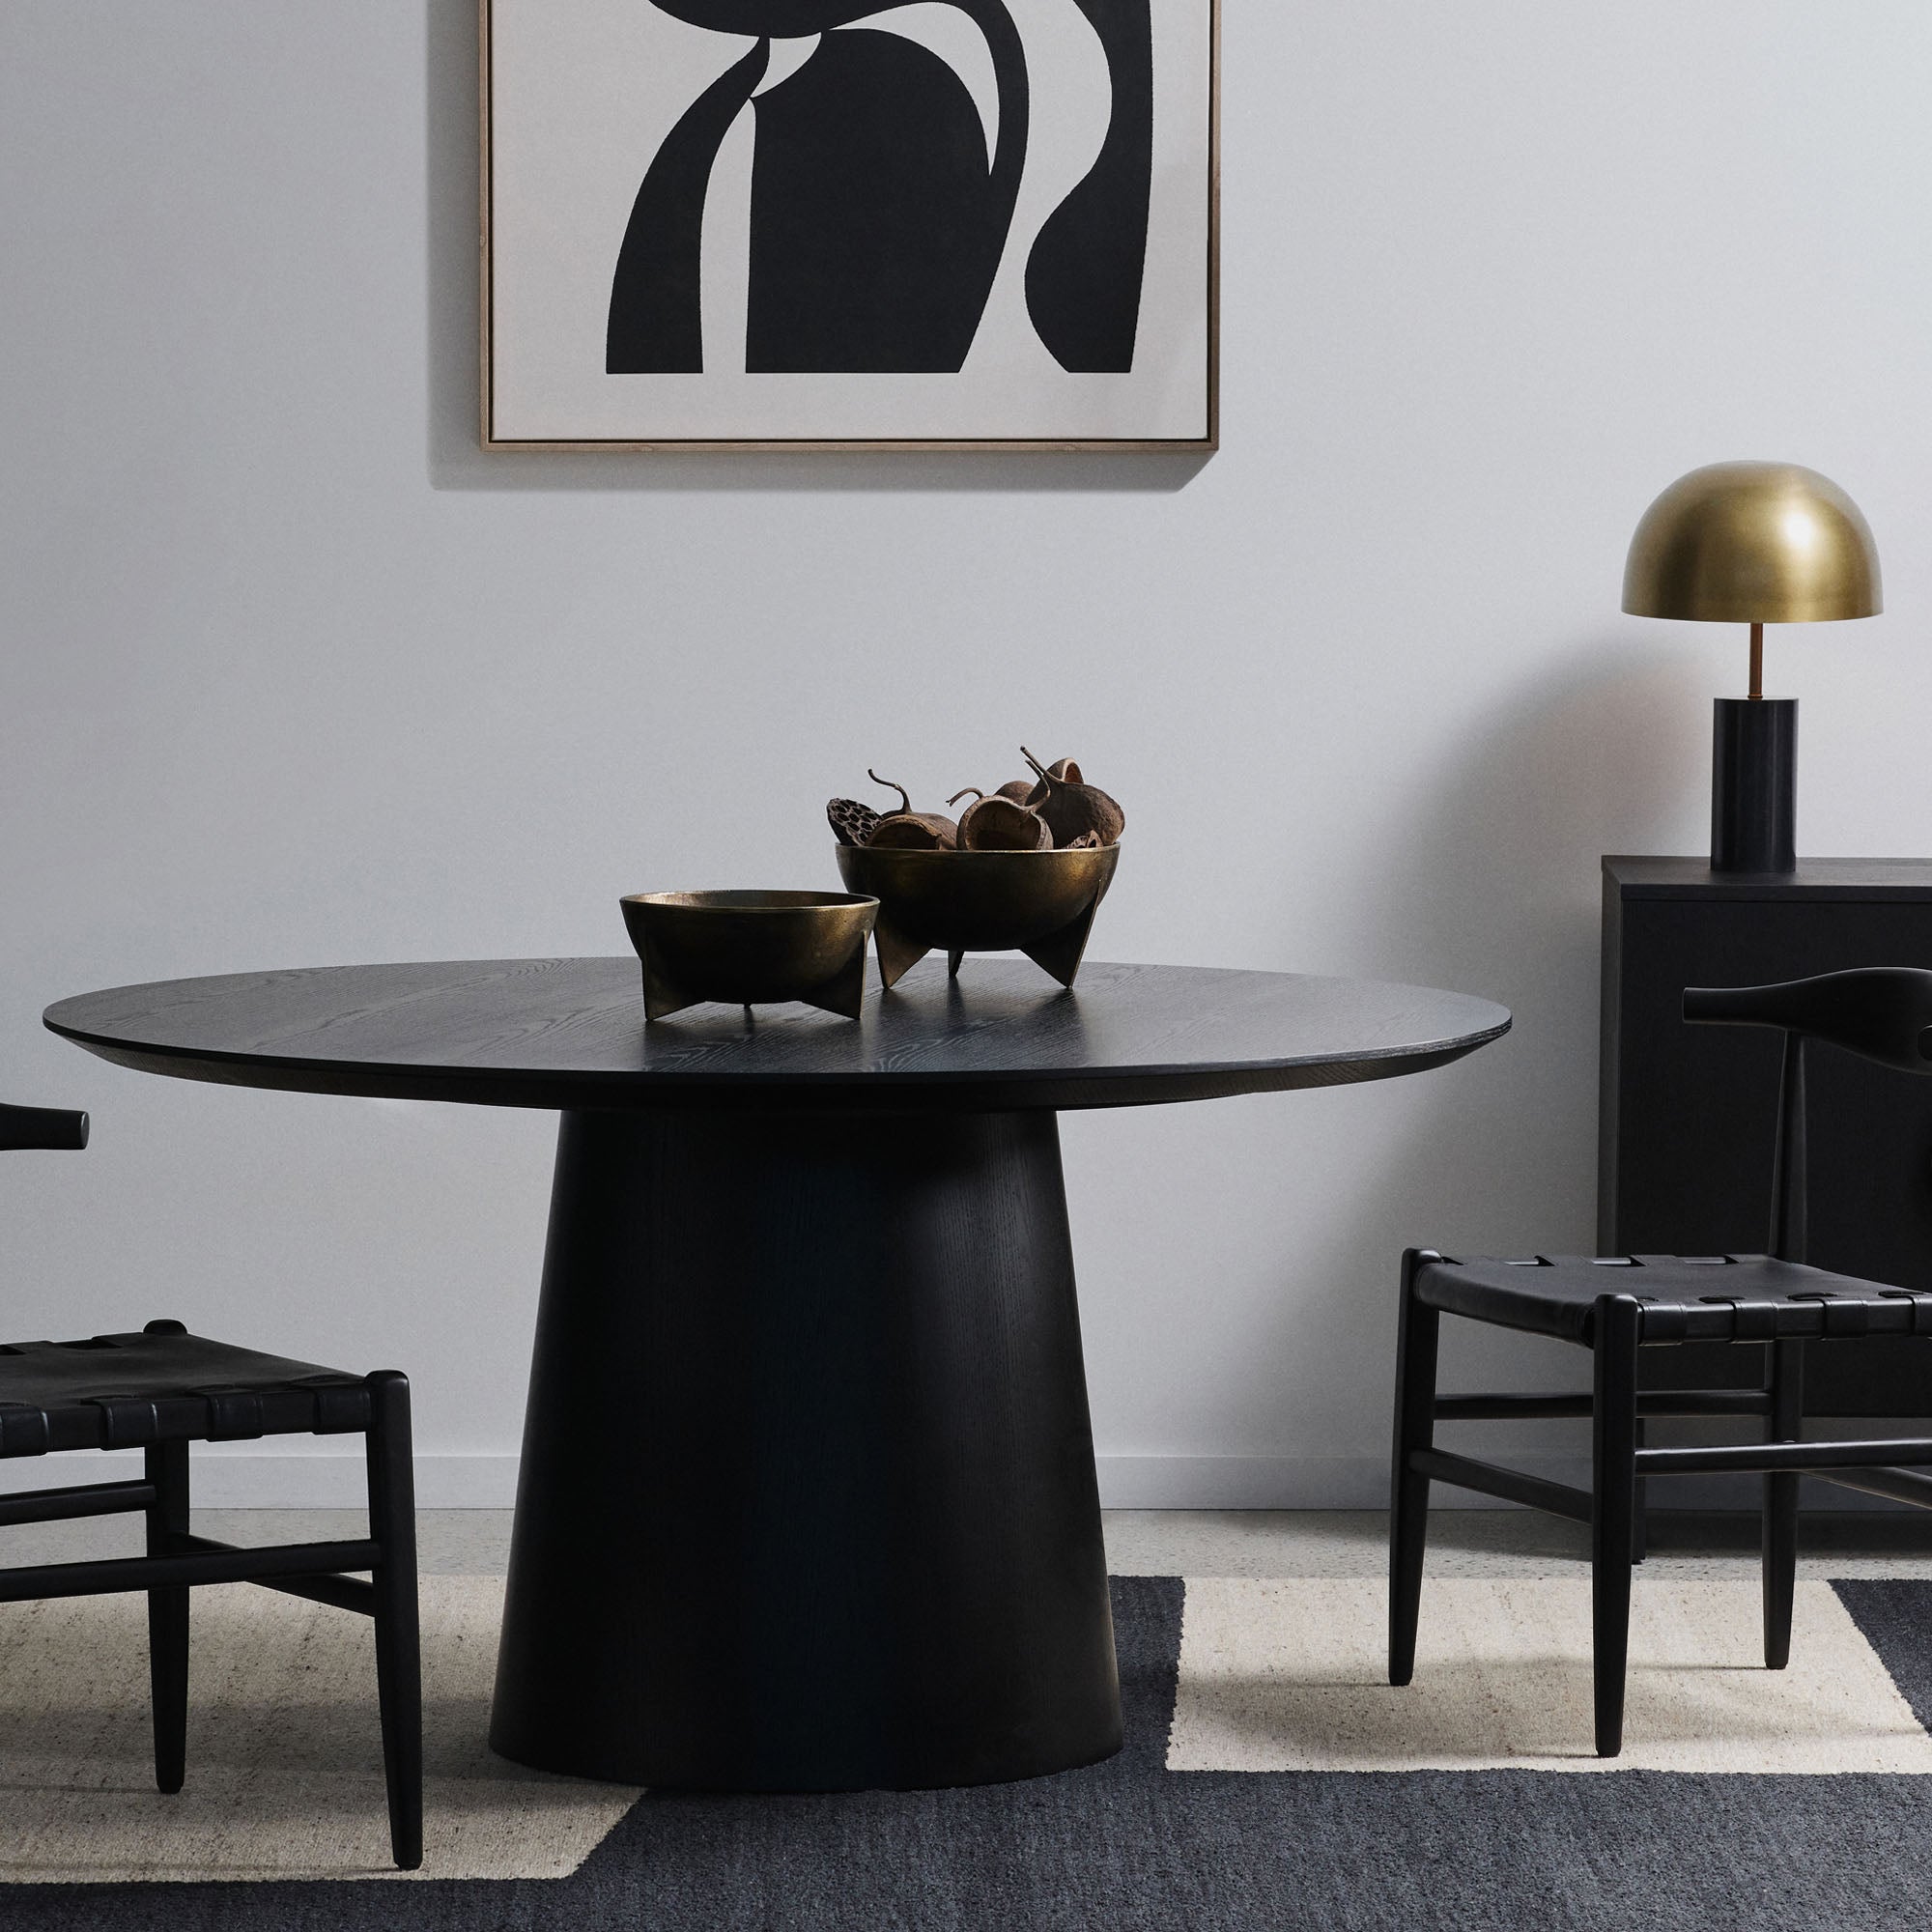 Pippa Round Dining Table Black Small